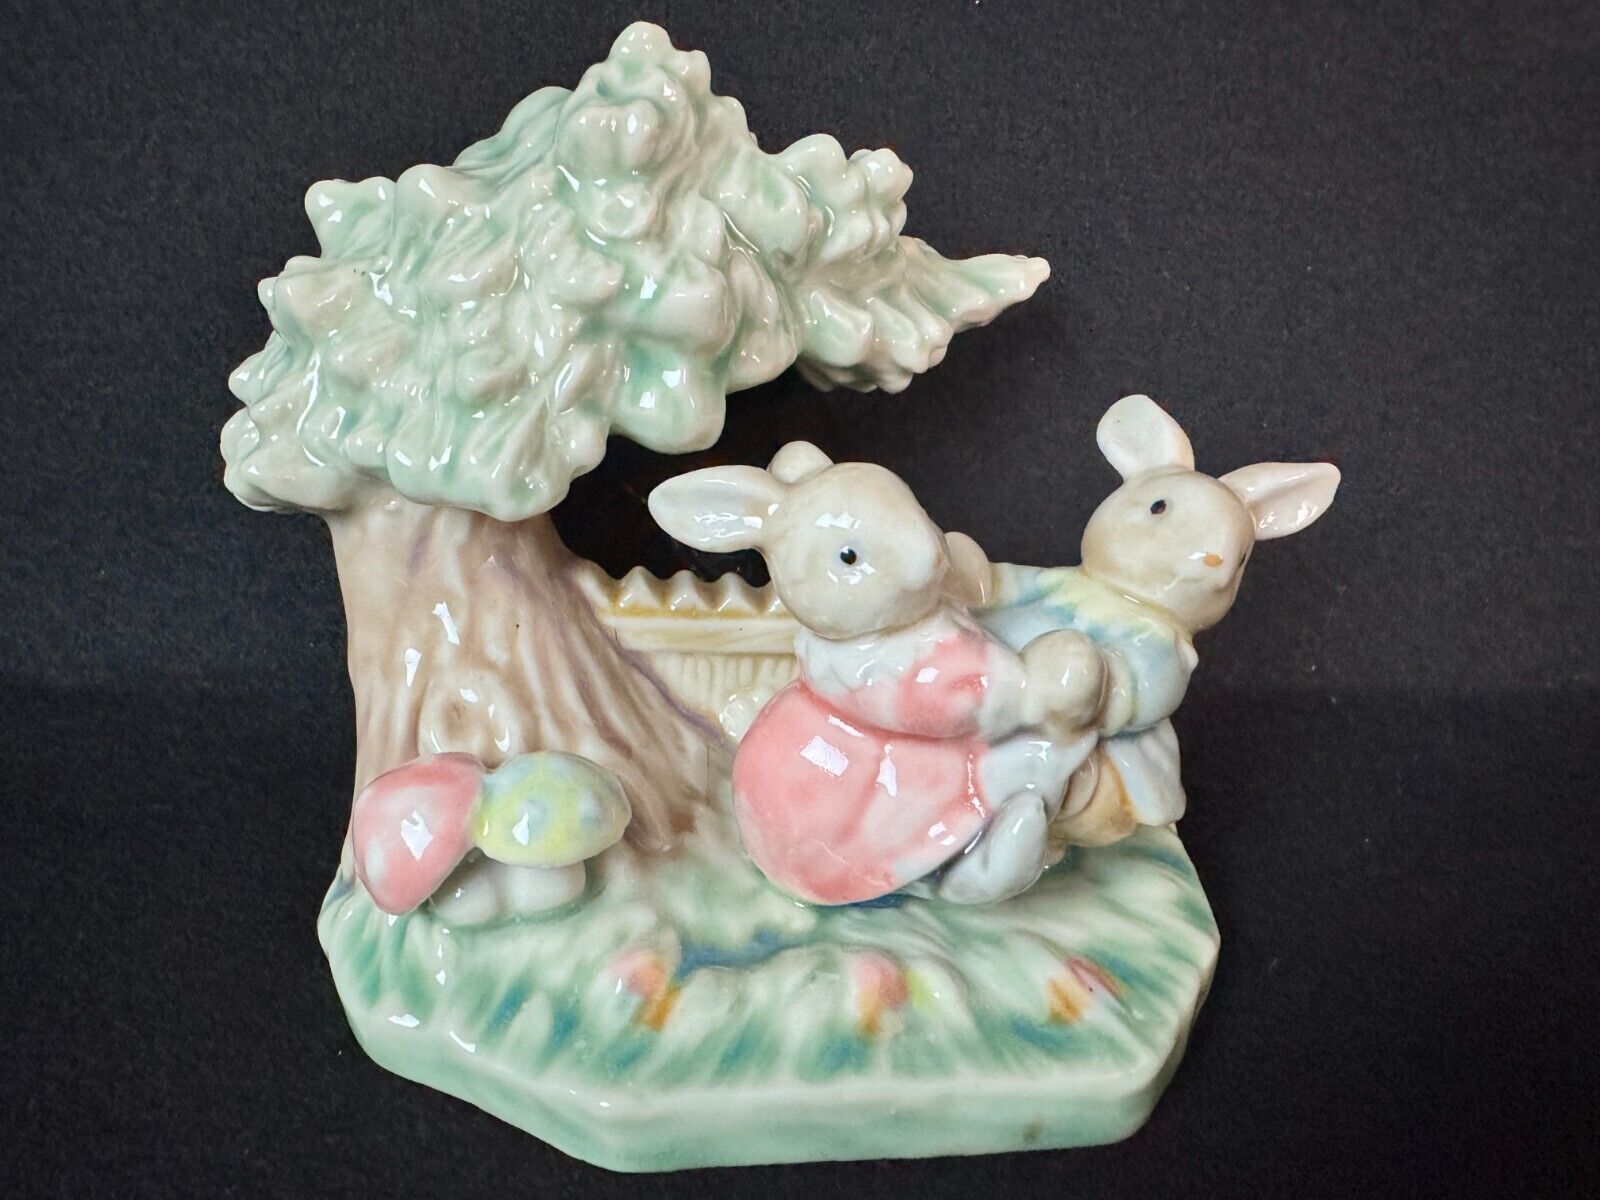 Albert Price Tale of Bunny Hollow Figurine Rabbits Dancing Playing in the Yard